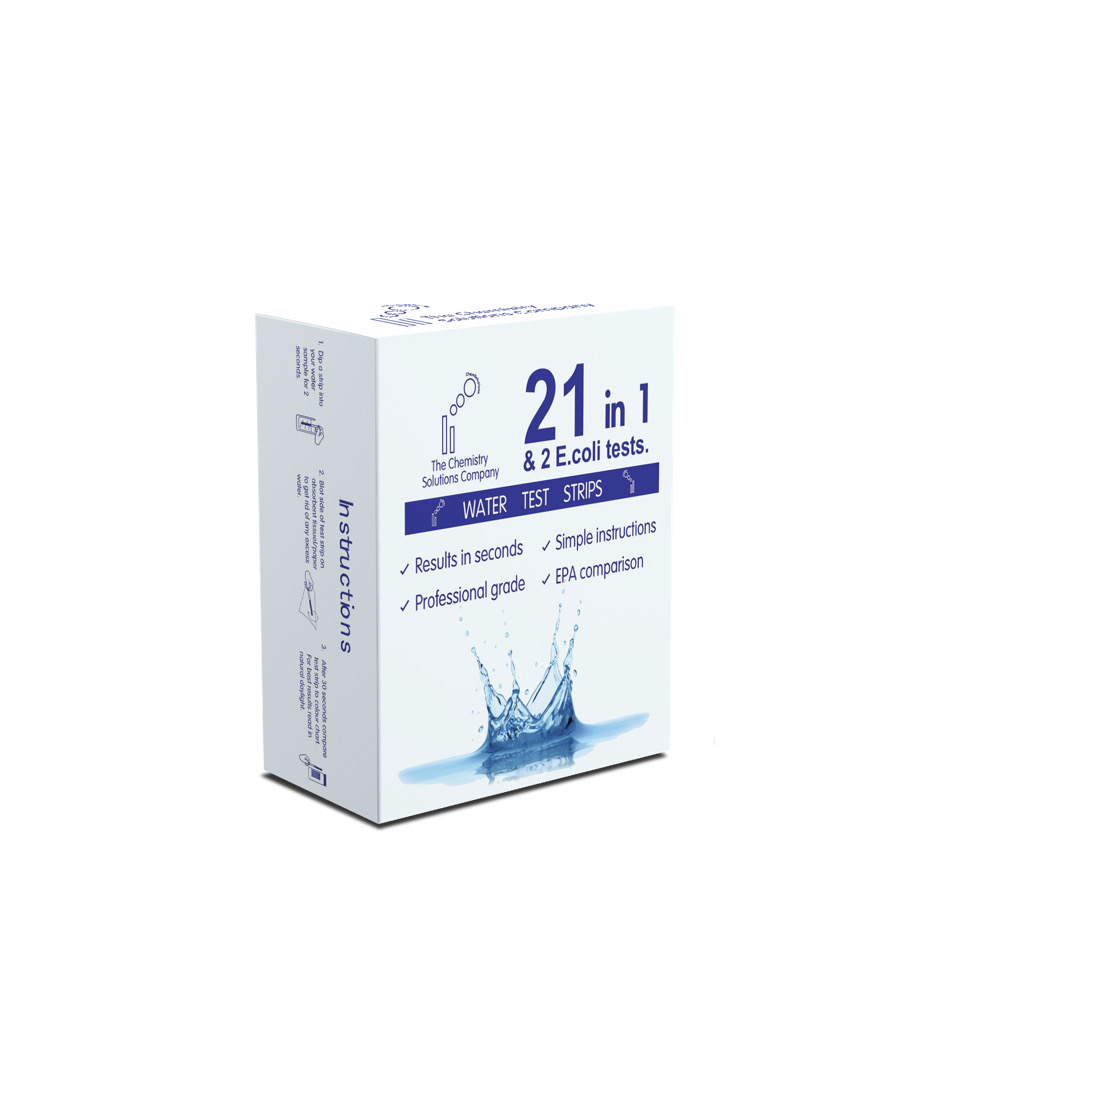 21 in 1 Water Quality Test Strips & 2 E.coli Tests